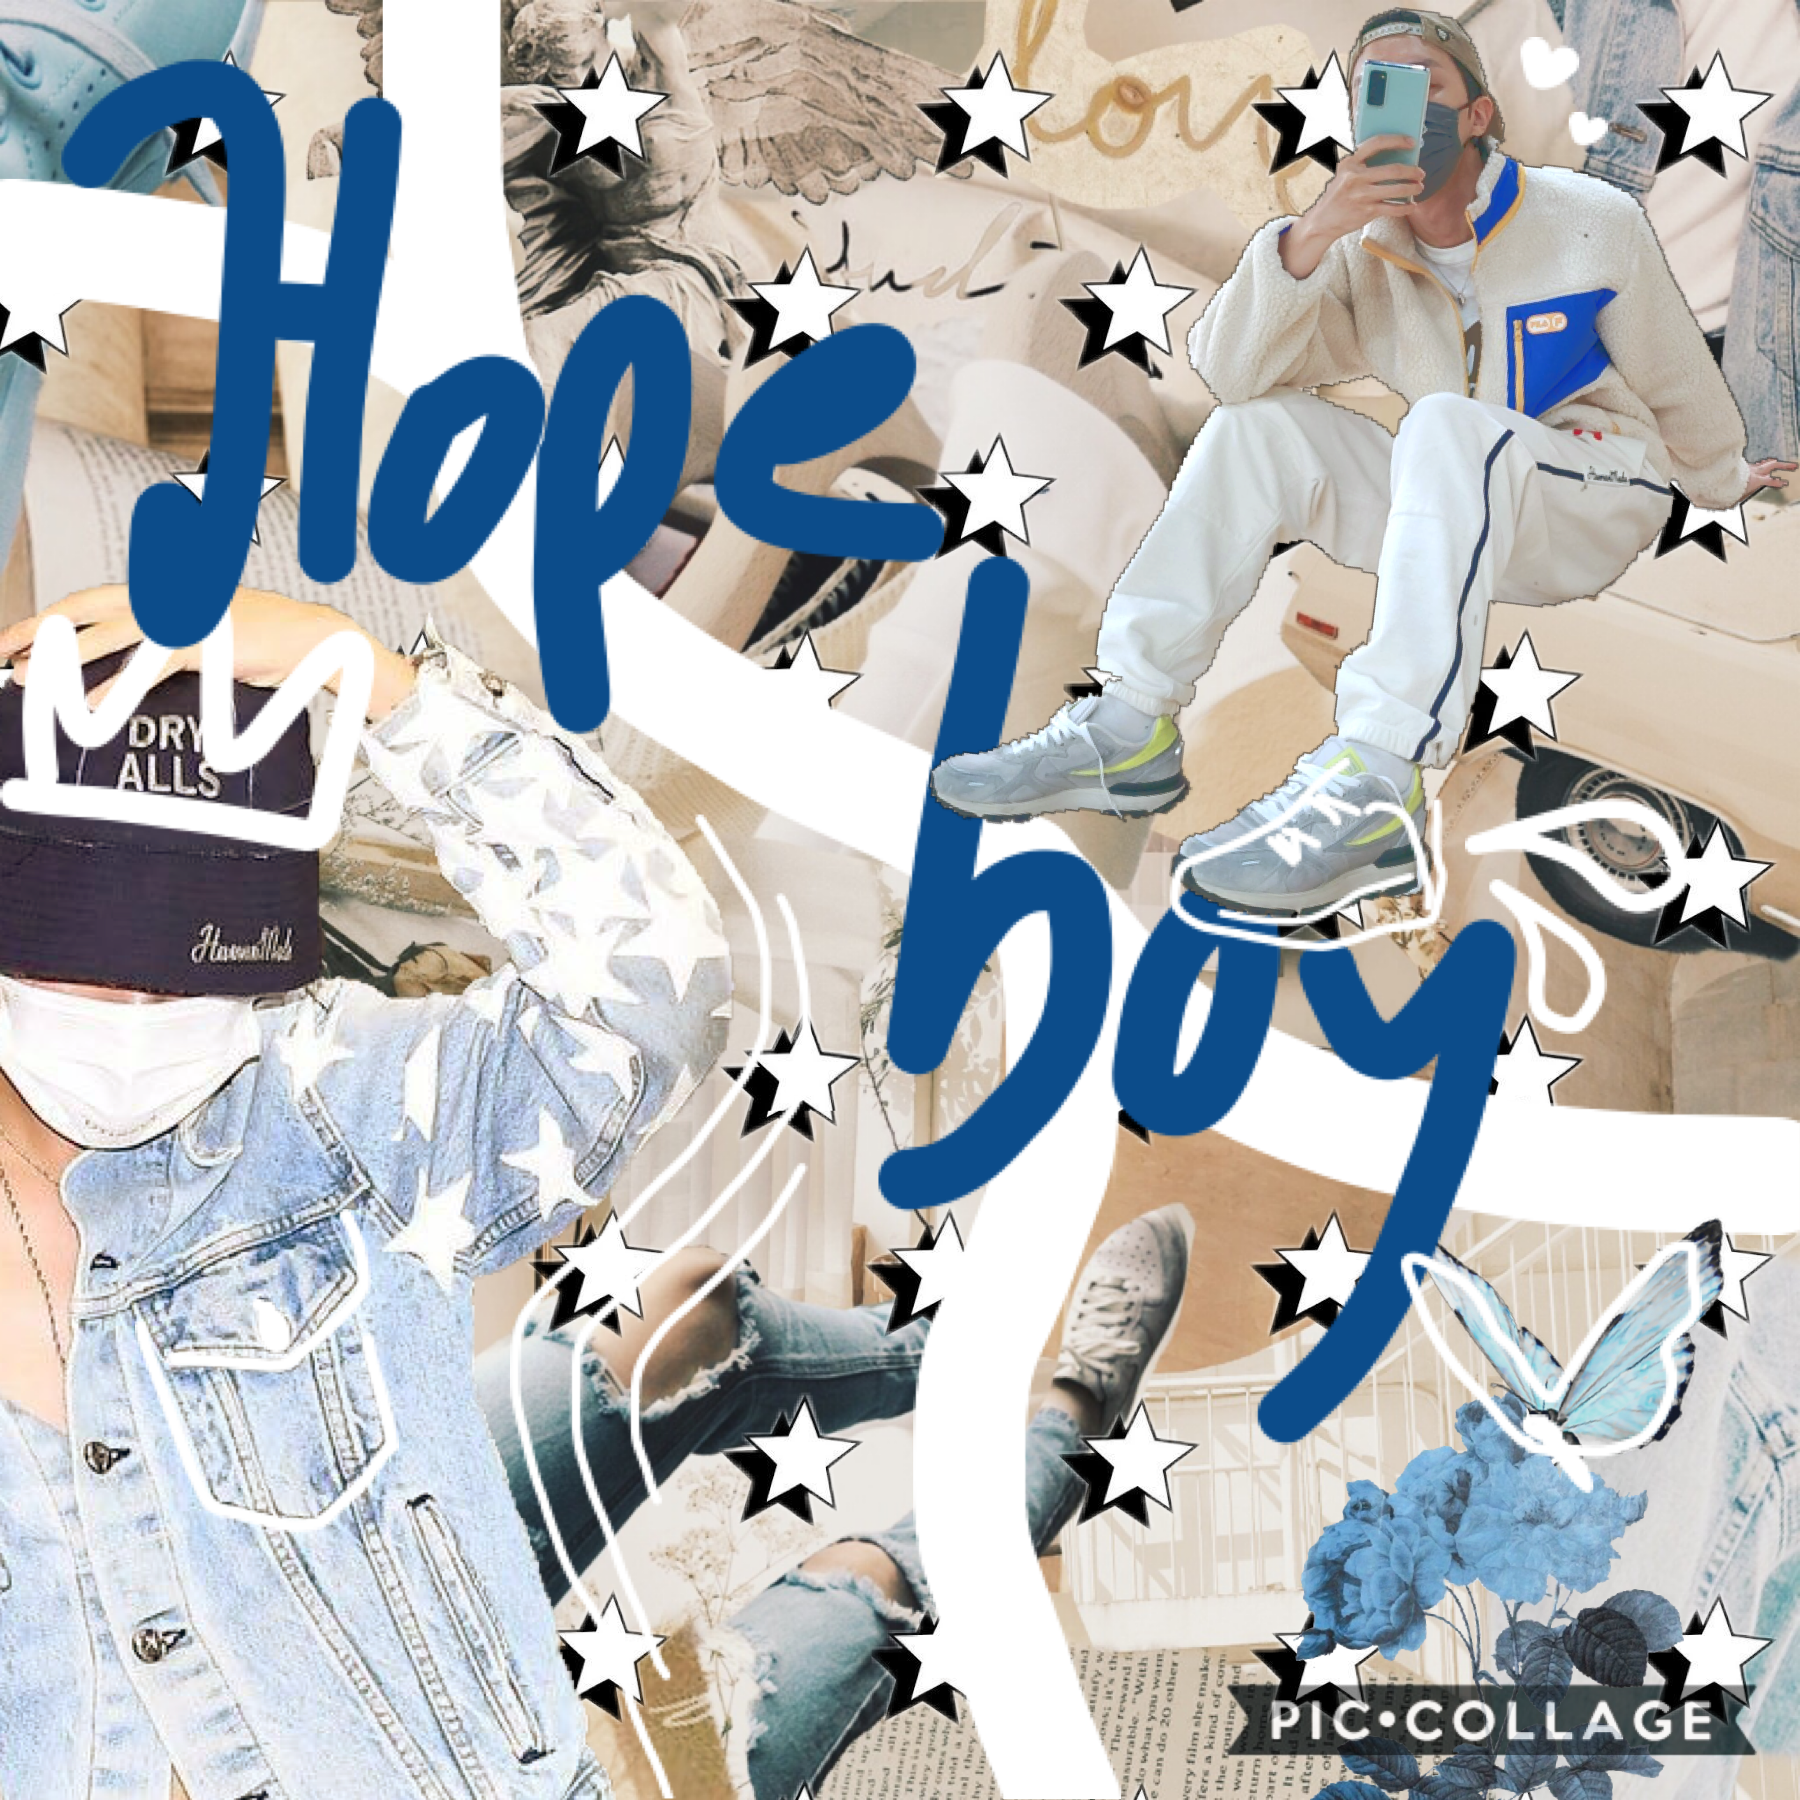 💙tap💙

wow it’s been so long since I even opened Piccollage but I was feeling inspired ✨

What do you think of BE? I love it so much 💜💜💜

qotd: favourite track from BE
aotd: Telepathy~